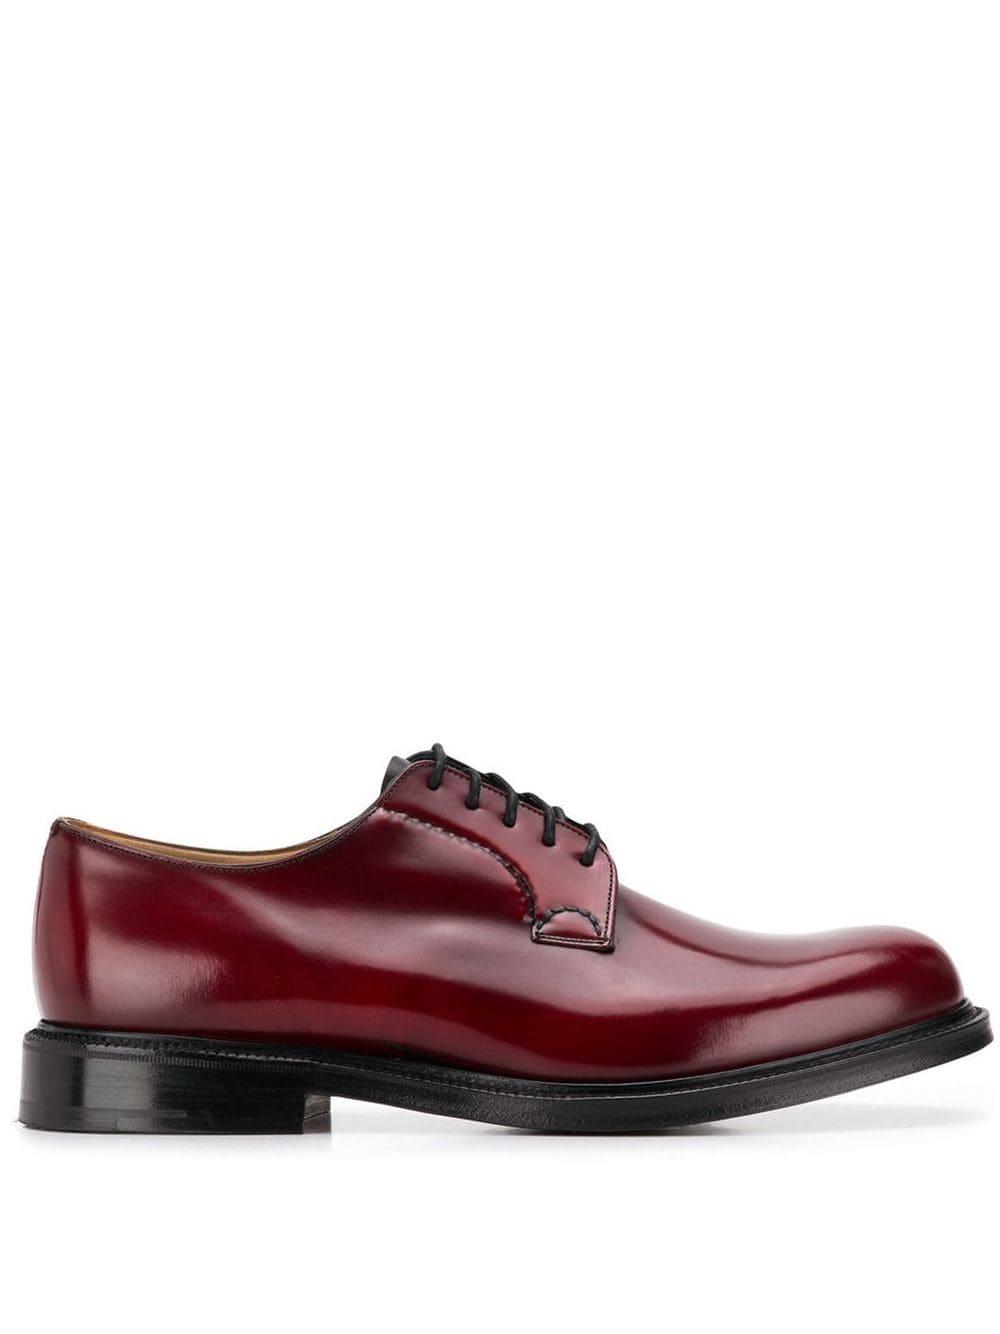 Church's Leather Shannon Shoes in Cherry (Red) for Men - Save 37% - Lyst